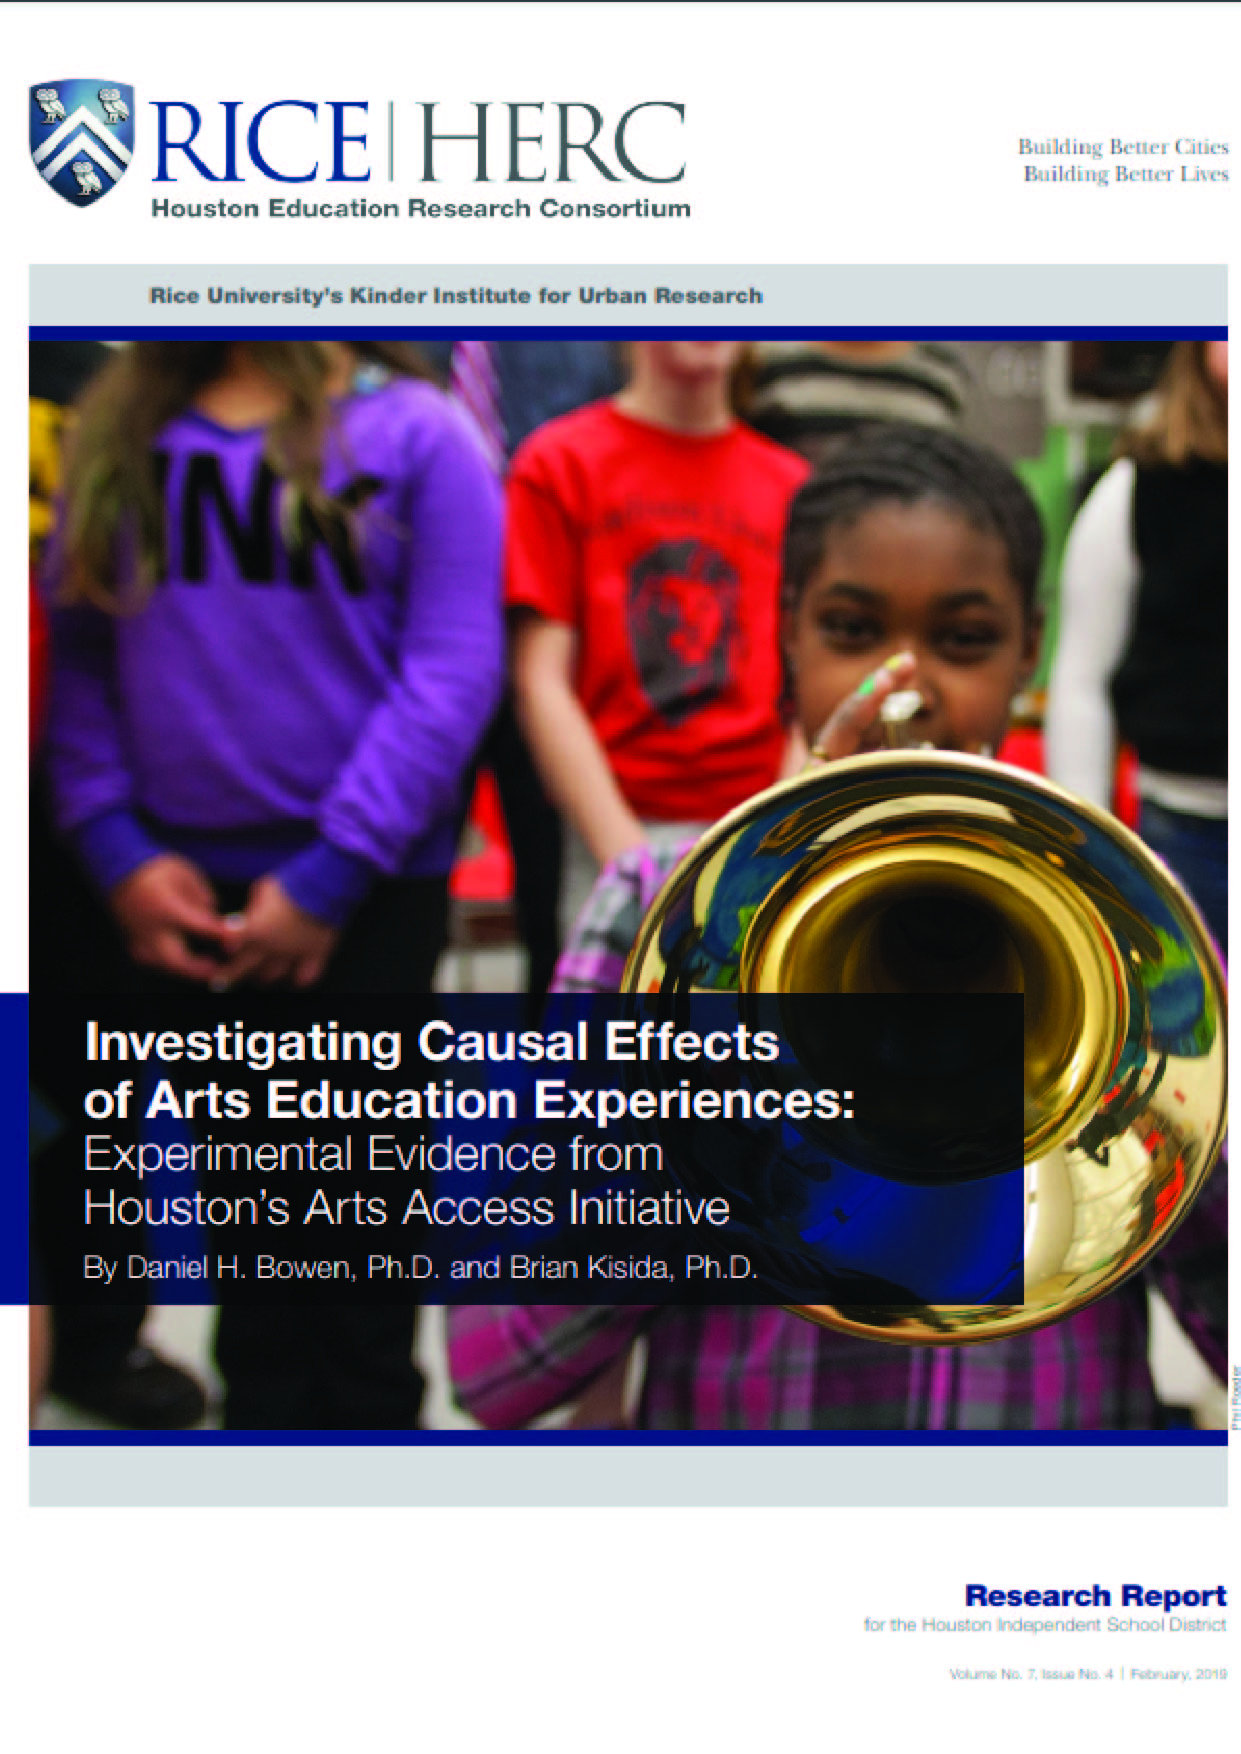 Investigating Causal Effects of Arts Education Experiences